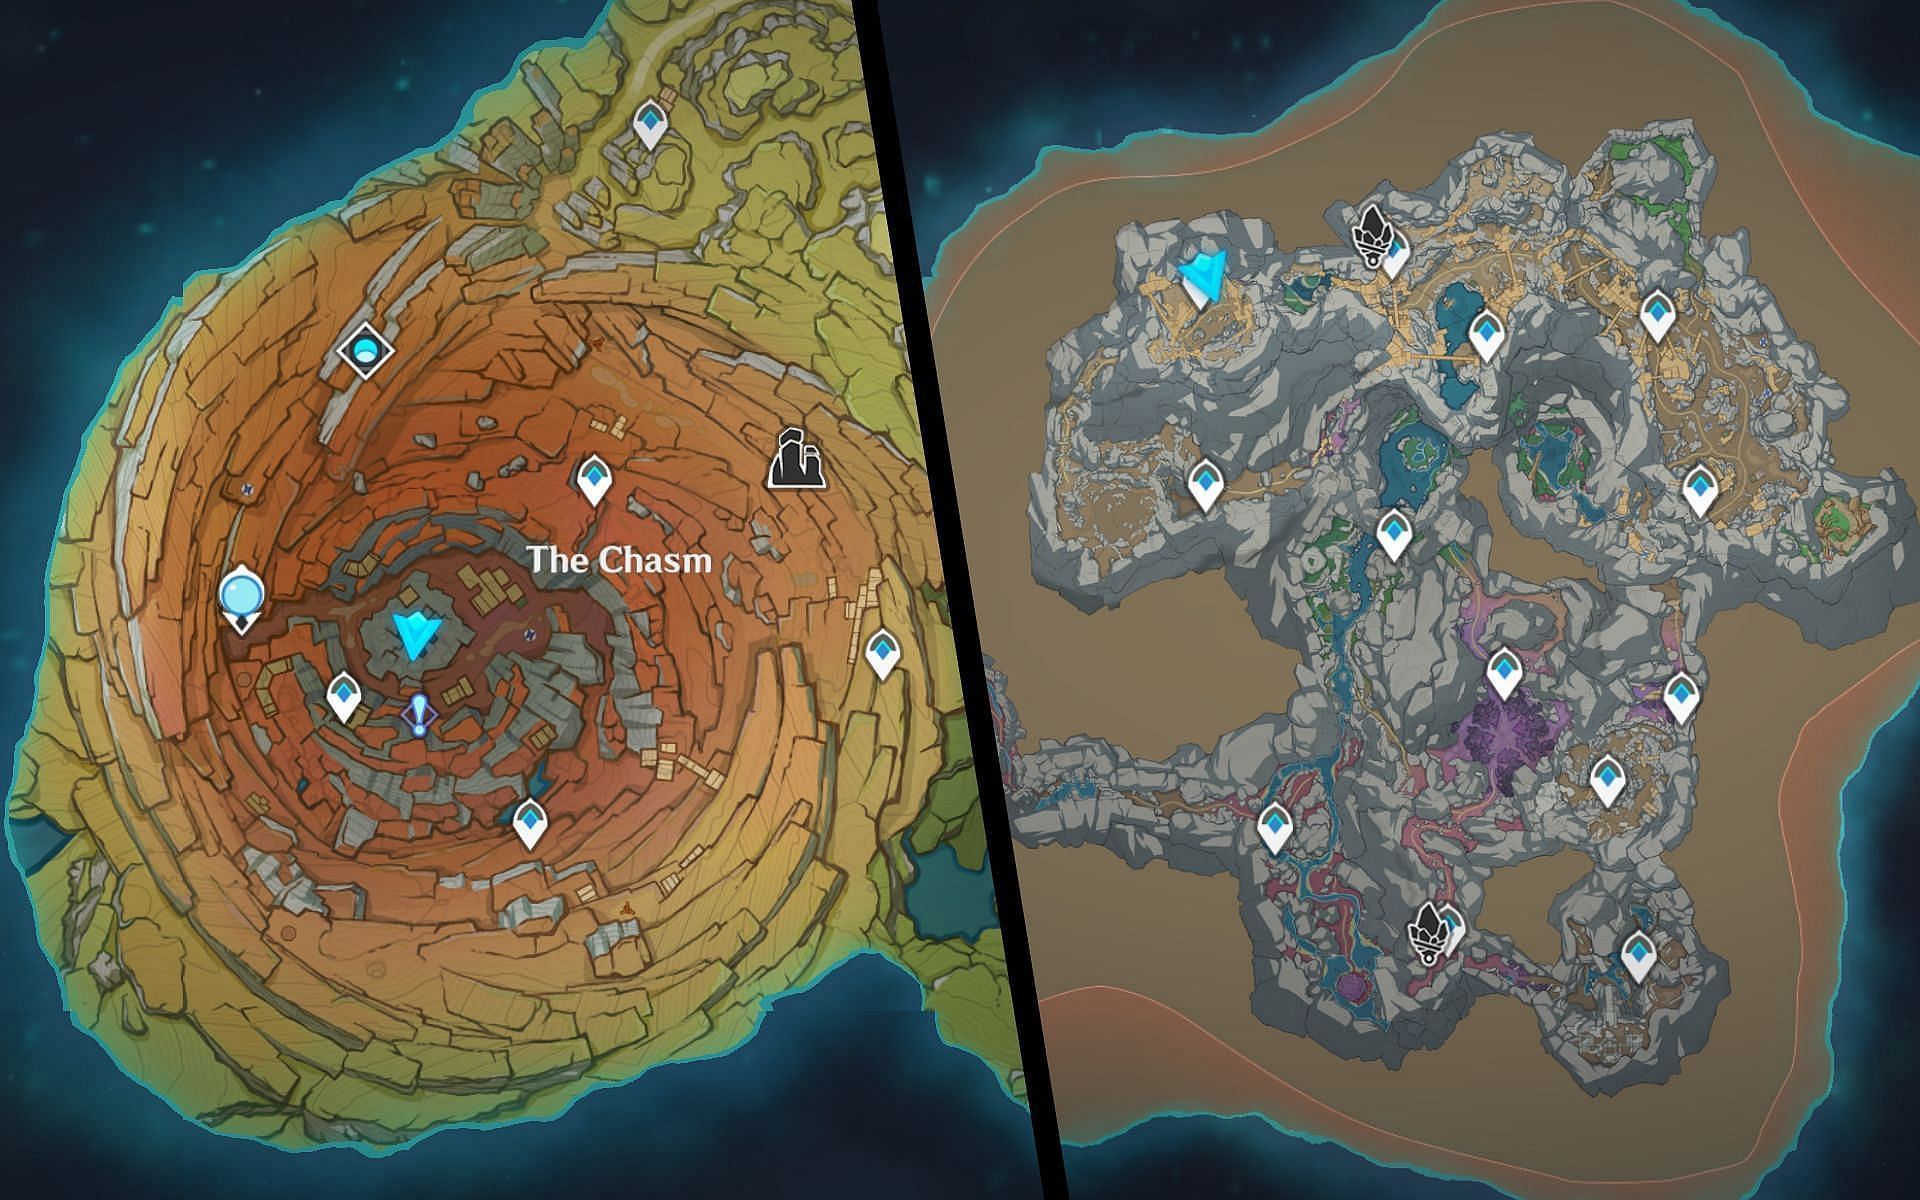 Genshin Impact 2.6 leaks: The Chasm map revealed and more (Image via HoYoverse)